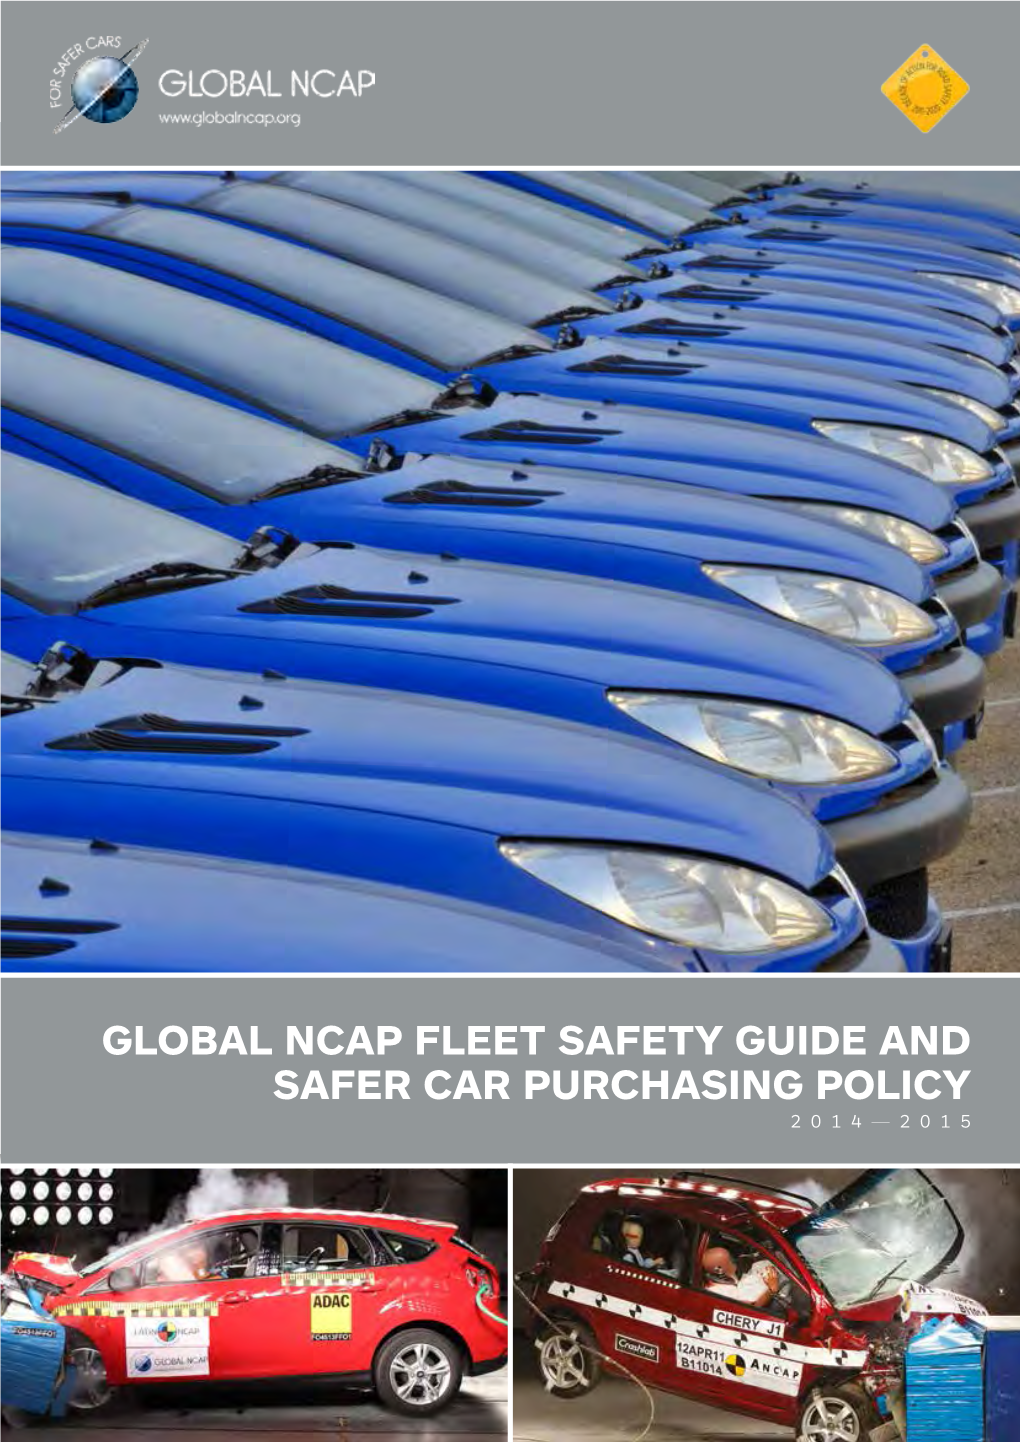 Global Ncap Fleet Safety Guide and Safer Car Purchasing Policy 2014— 2015 About Global Ncap